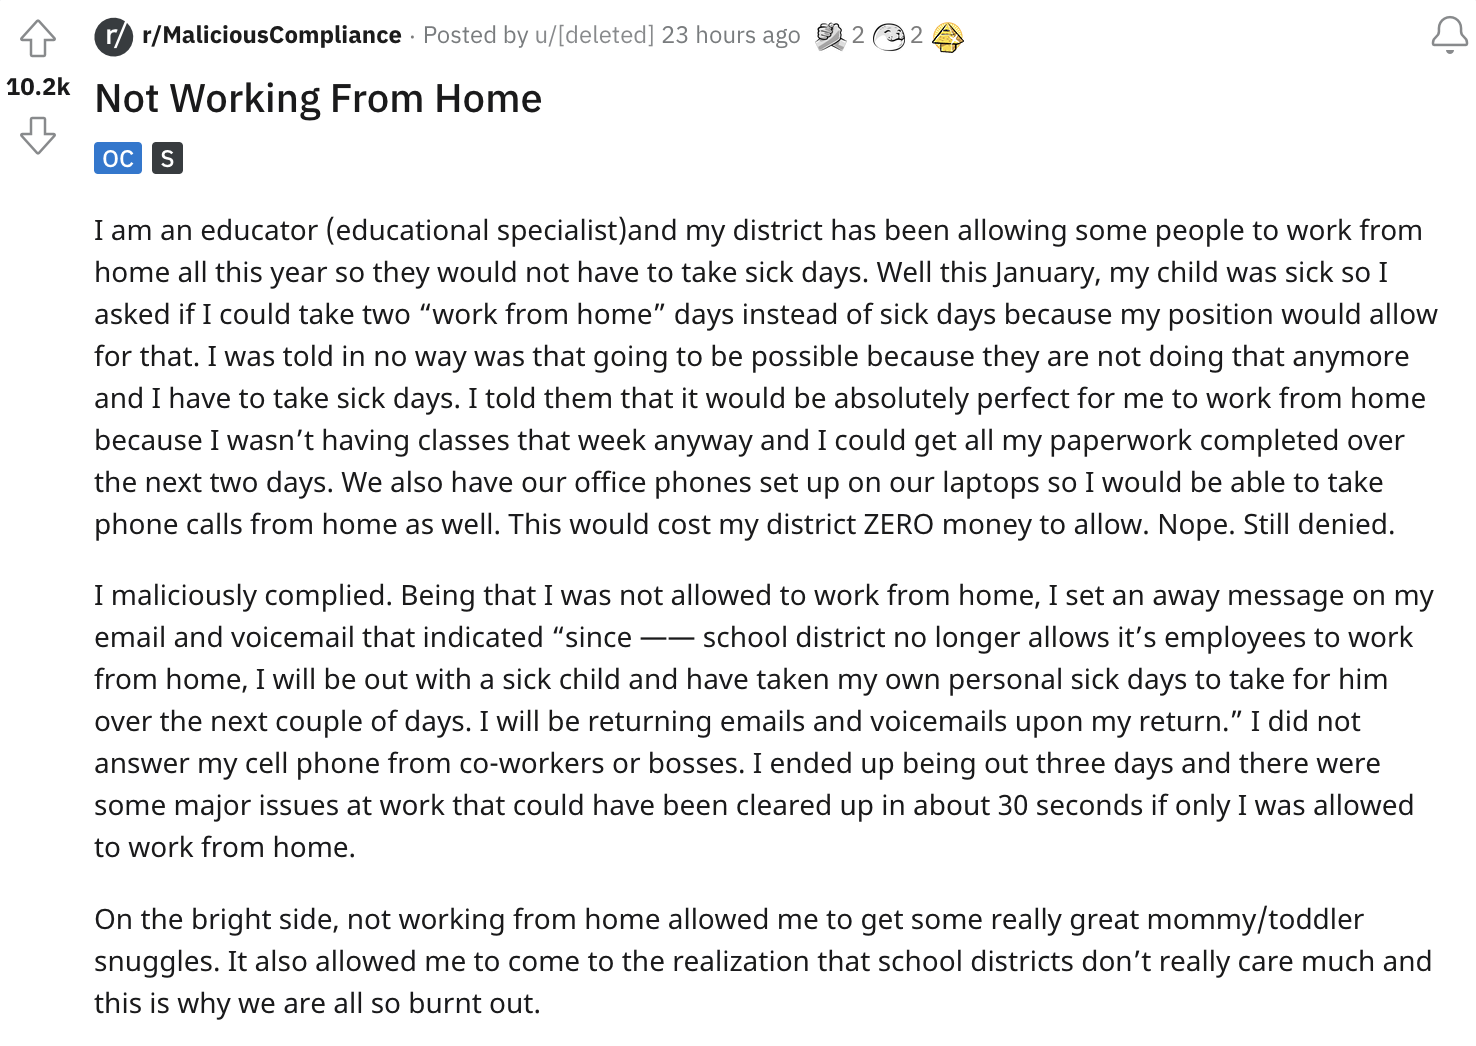 Malicious Compliance - I am an educator educational specialistand my district has been allowing some people to work from home all this year so they would not have to take sick days